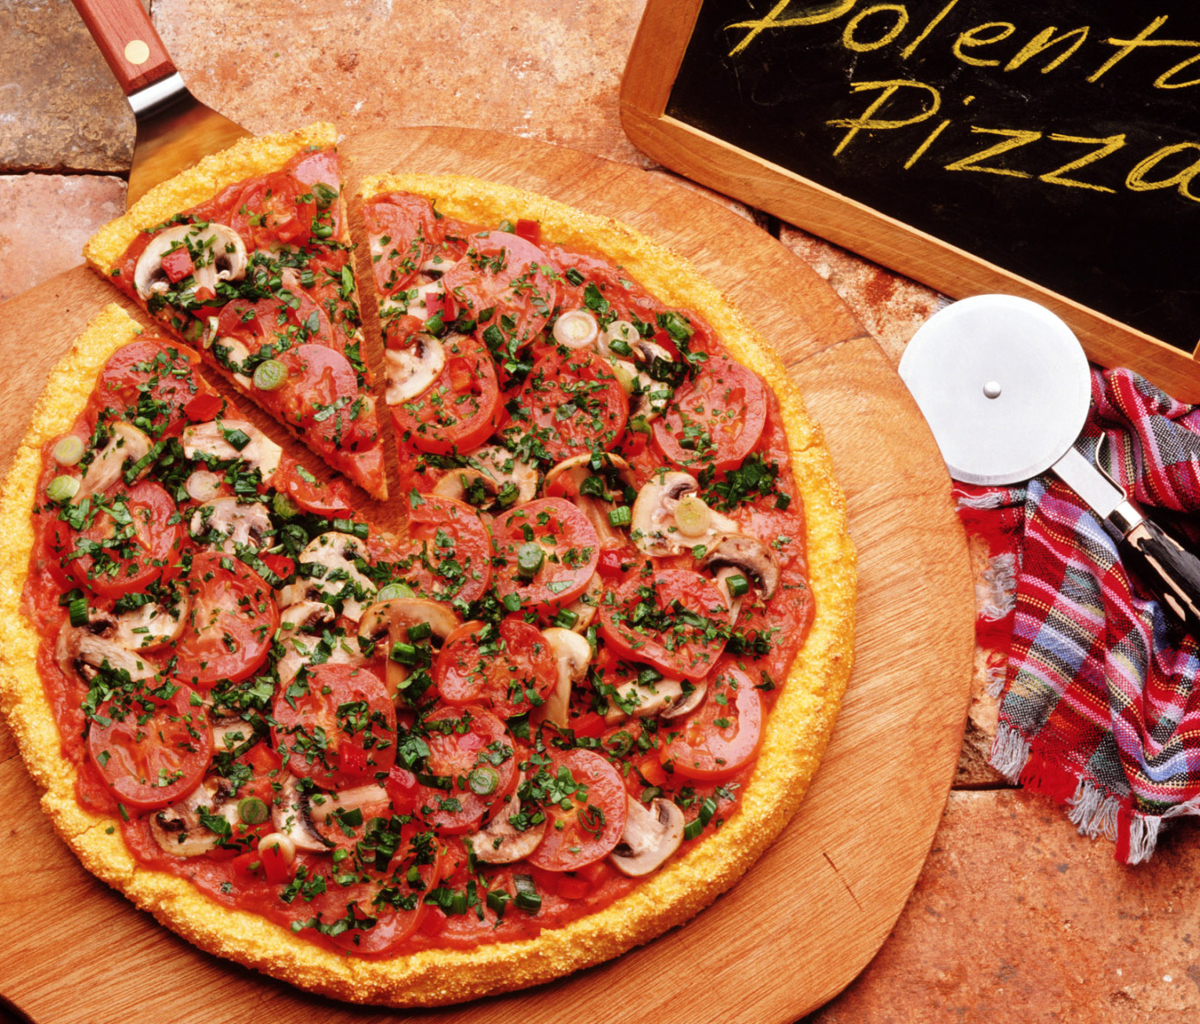 Pizza With Tomatoes And Mushrooms wallpaper 1200x1024